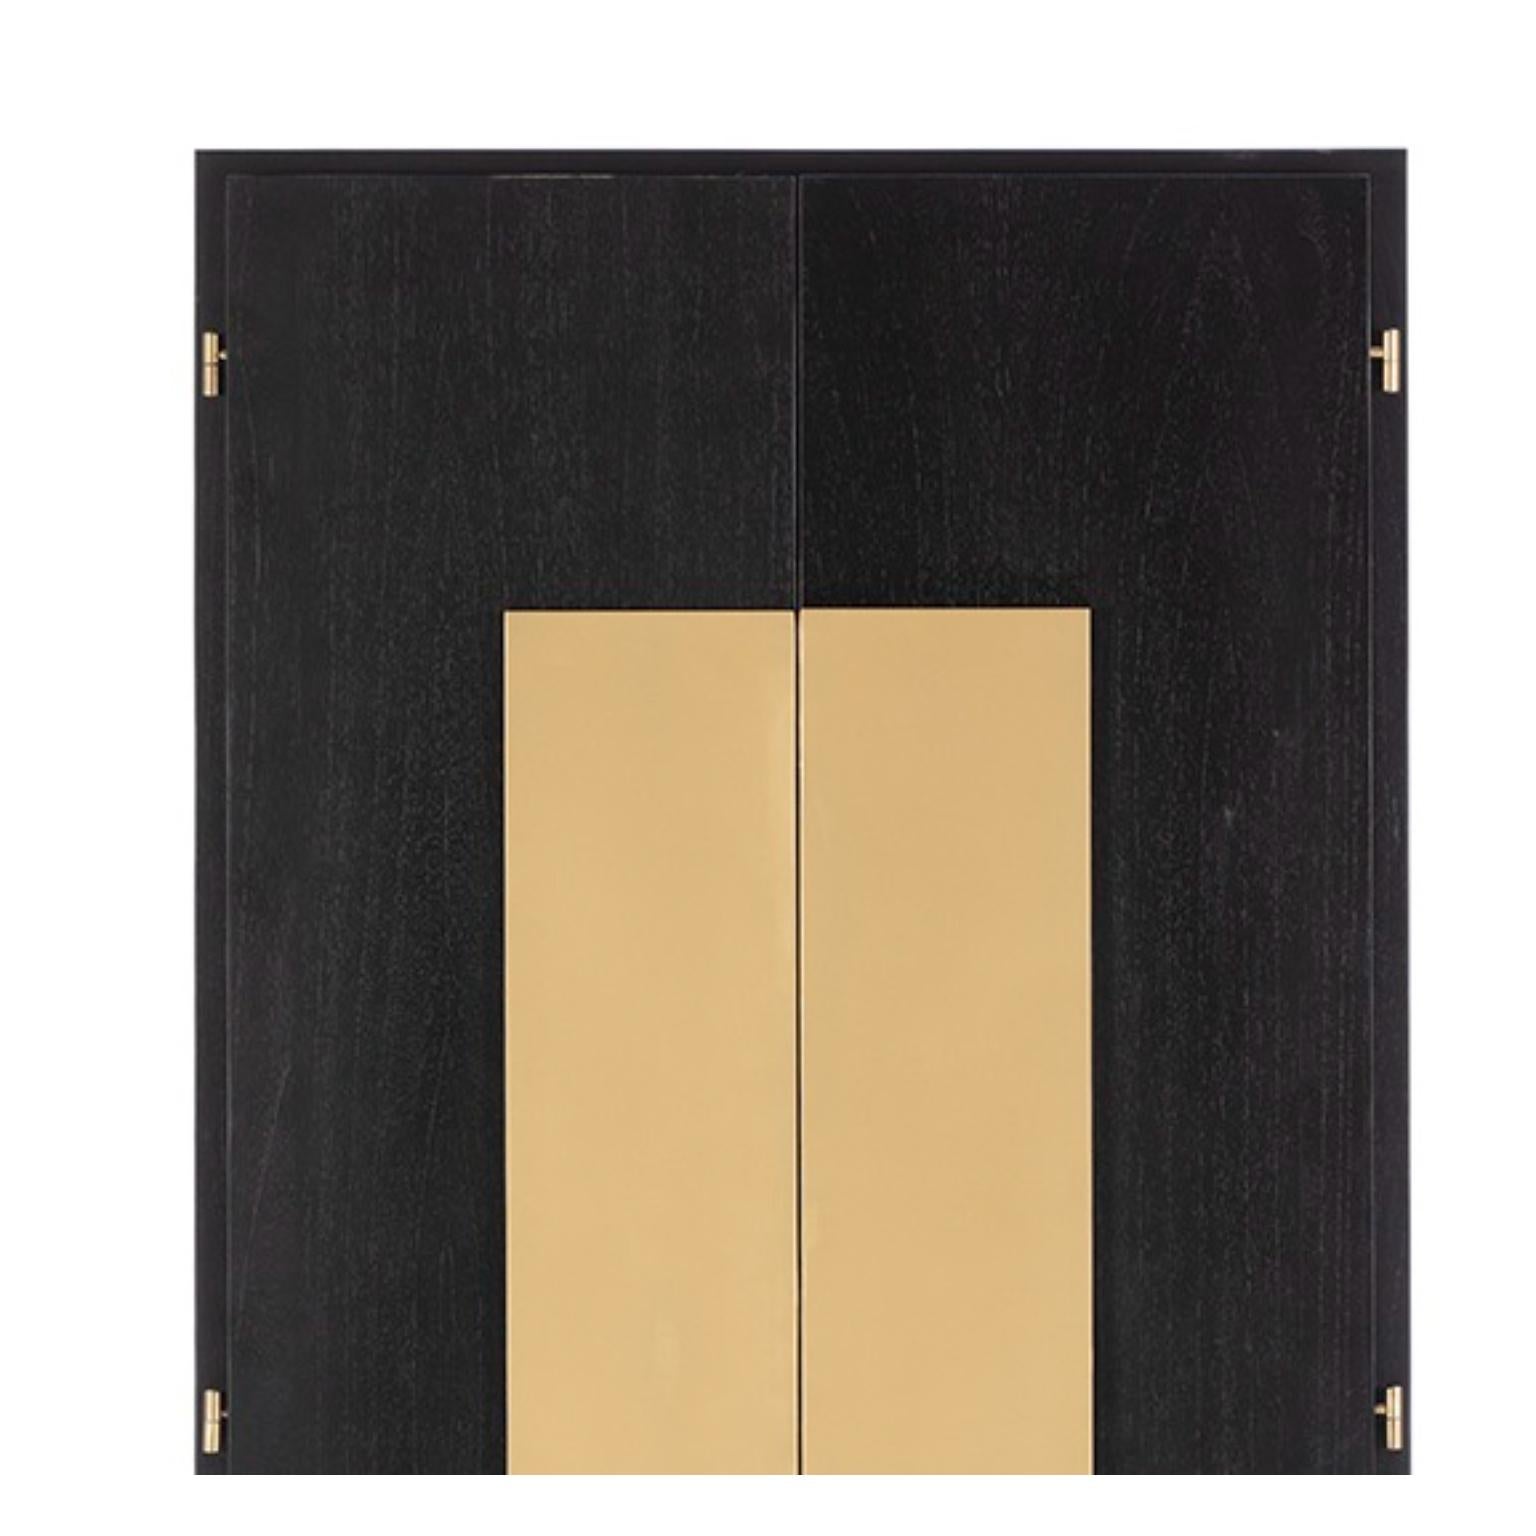 Black Wood And Golden Metal Wardrobe by Thai Natura
Dimensions: D 45 x W 85 x H 195 cm.
Materials: Black wood and golden metal.

THAI NATURA is a company that designs, produces and commercializes furniture, lighting and decorative items. Our company